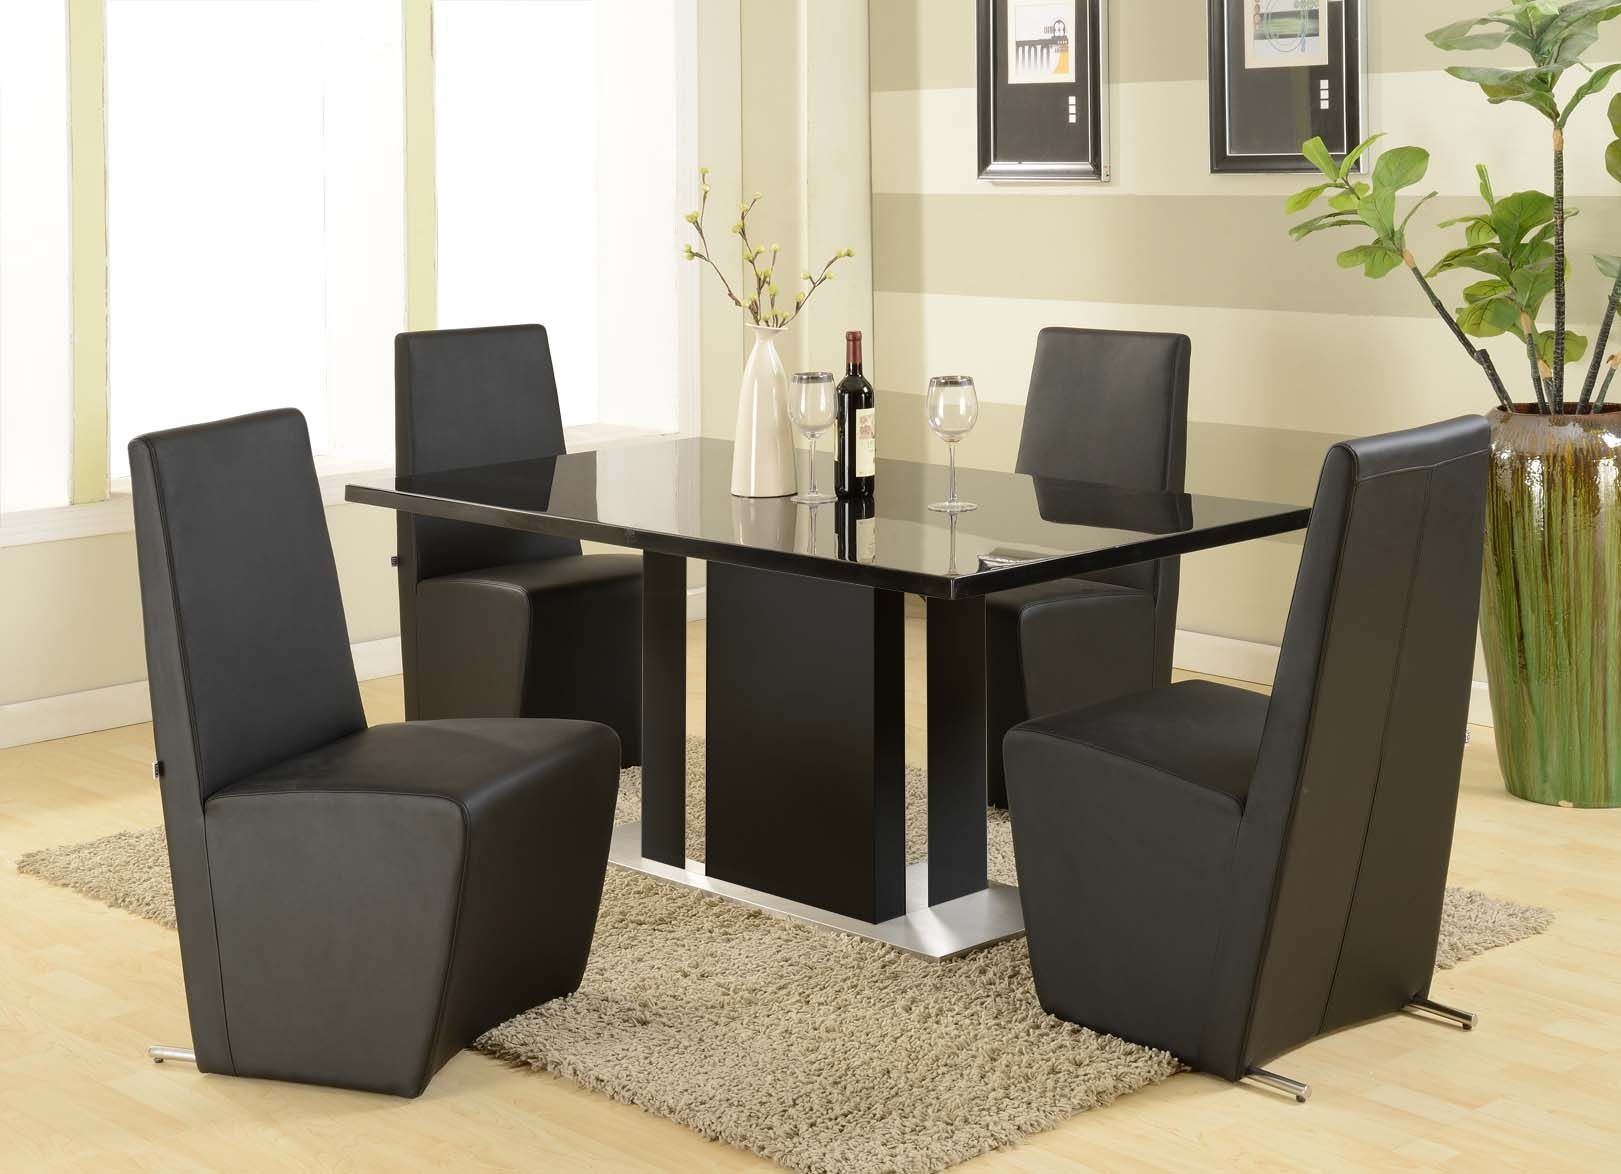 Black marble dining table set 17